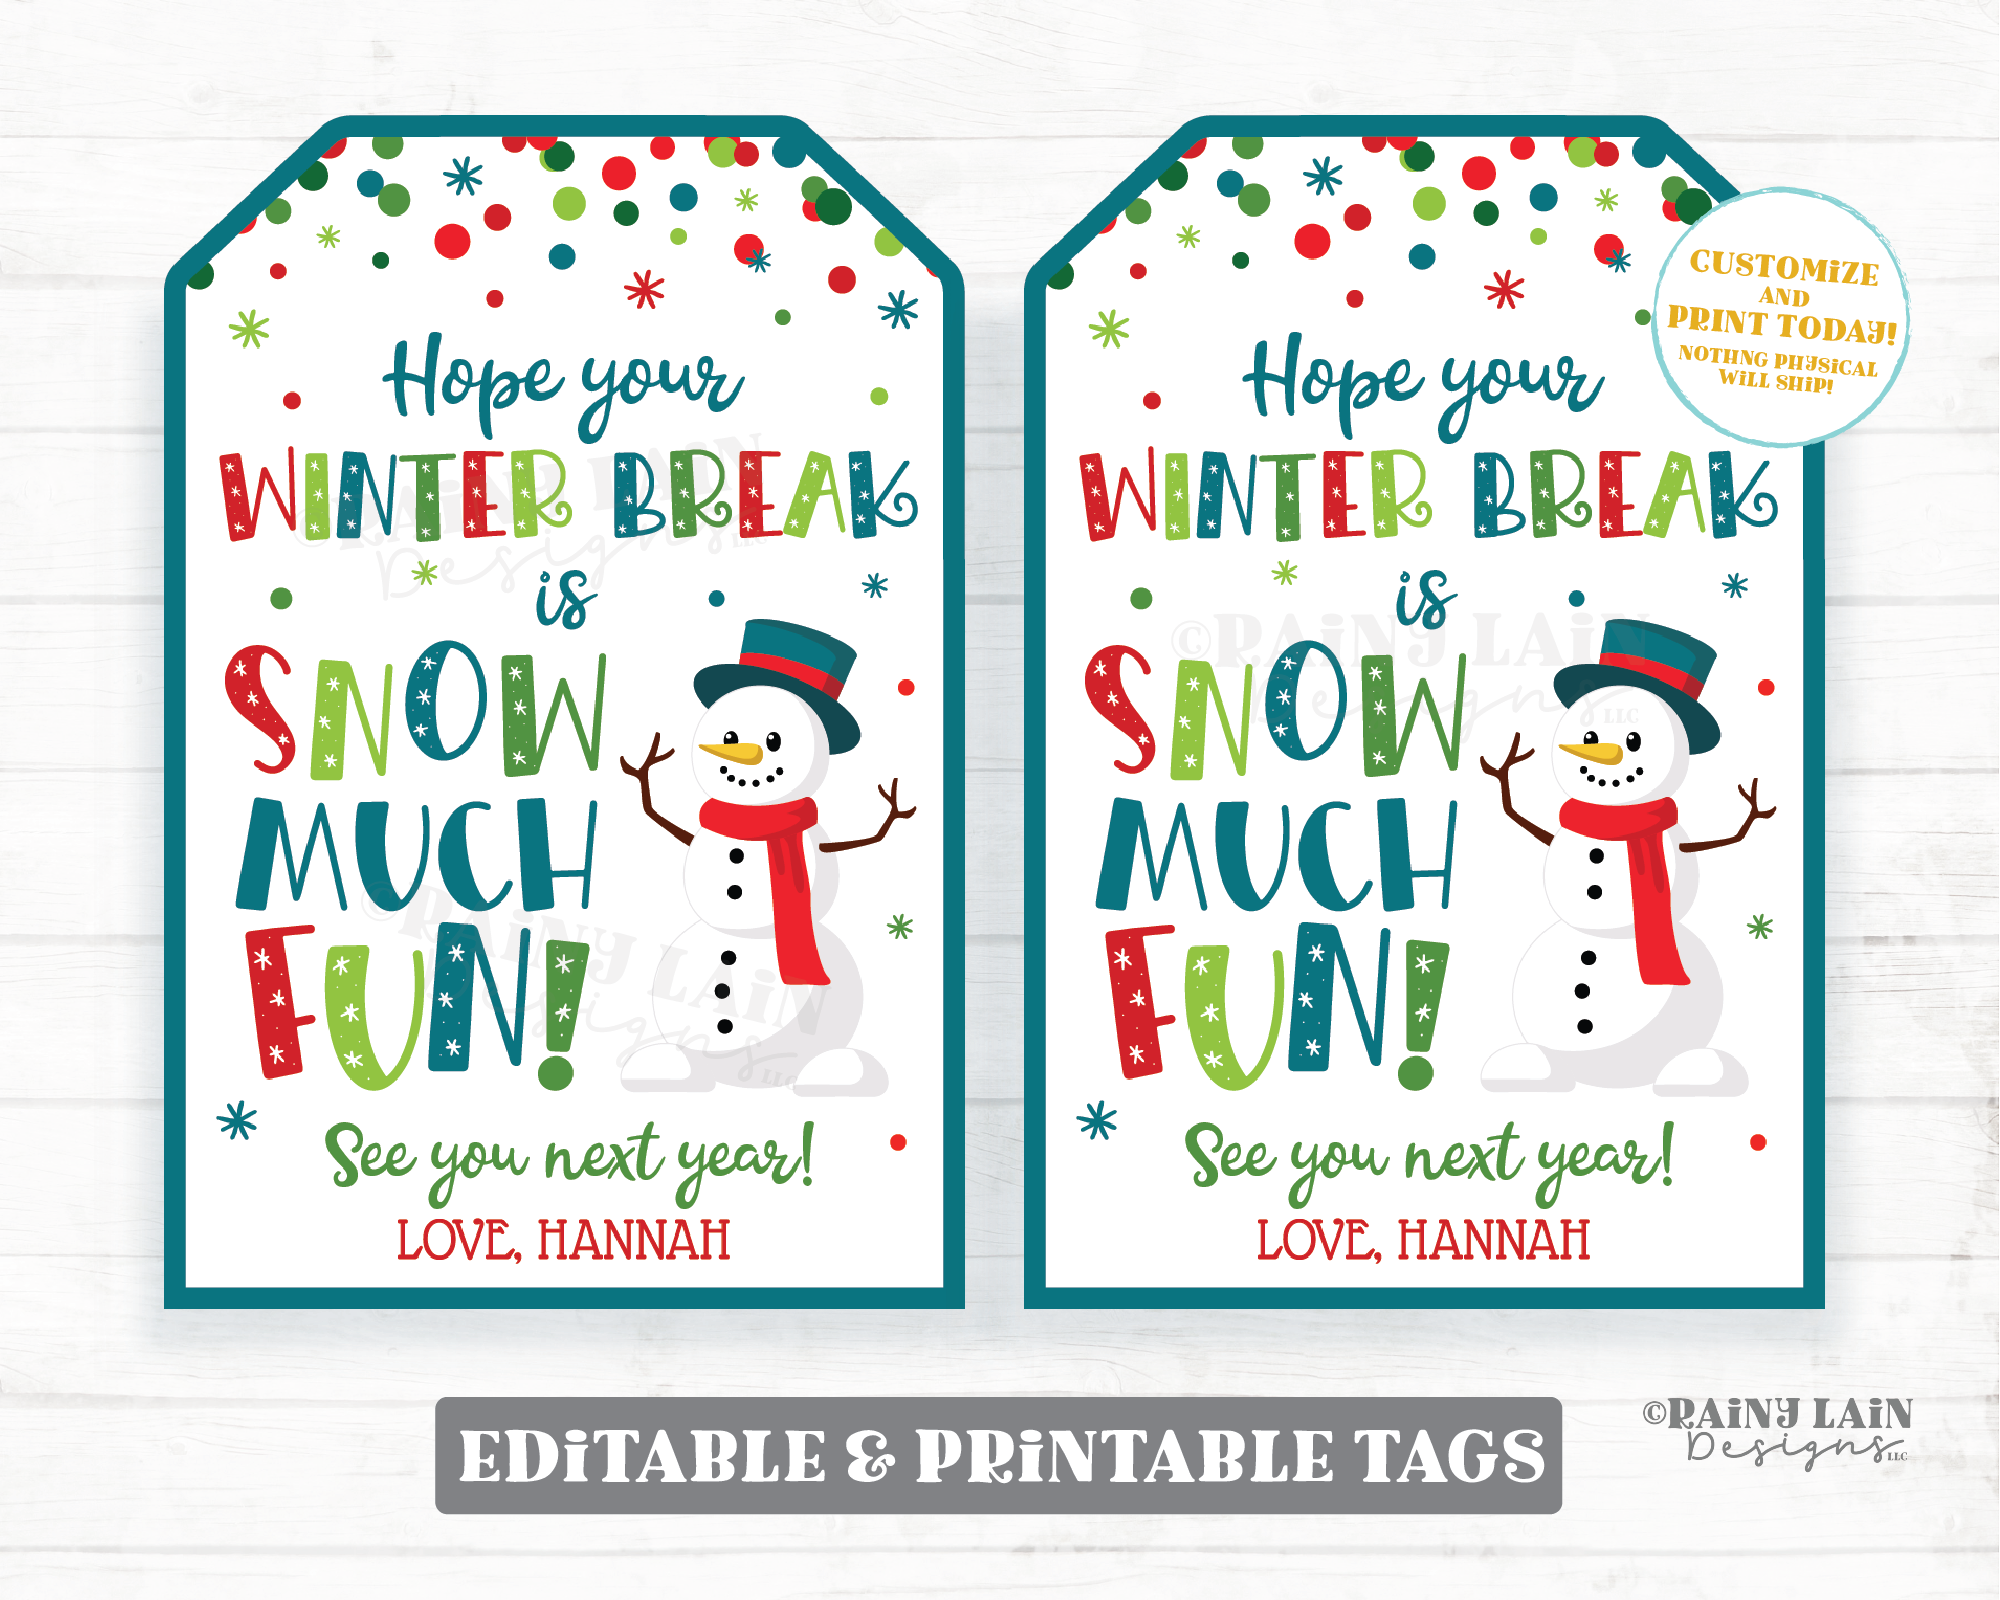 Hope your Winter Break is Snow Much Fun Tag From Teacher Holiday Gift Tag Printable Kids Christmas Student Preschool Classroom Party Favor